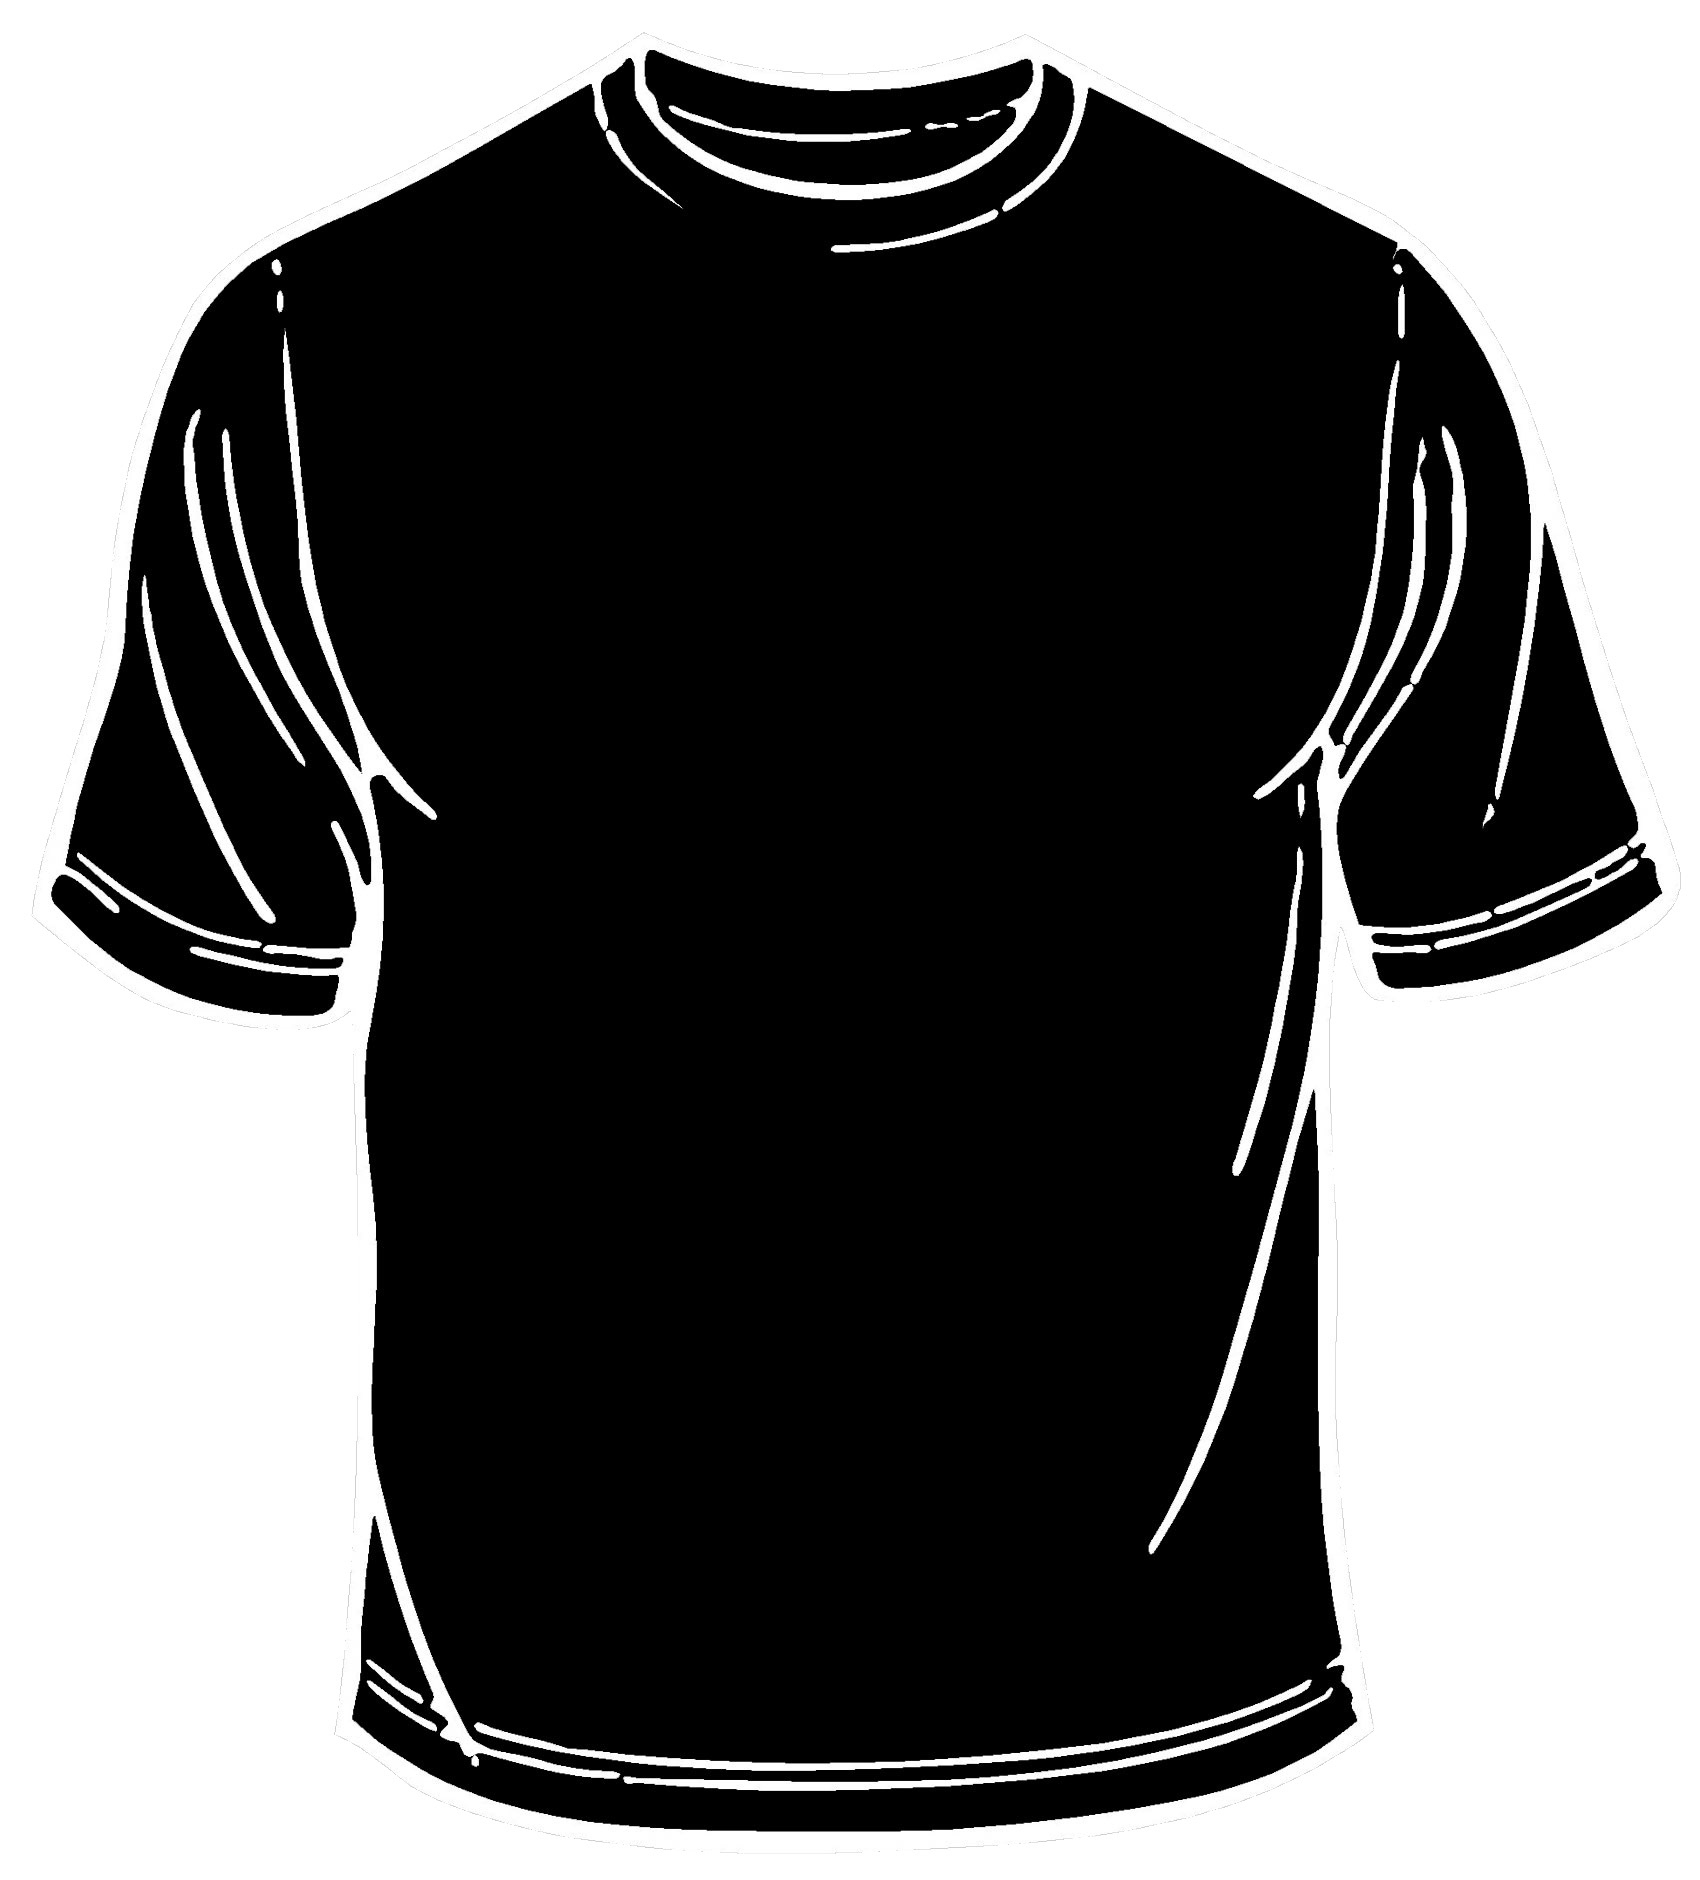 Images For &gt; Black T Shirt Model Template - Clipart Best with regard to Blank Black Hoodie Template